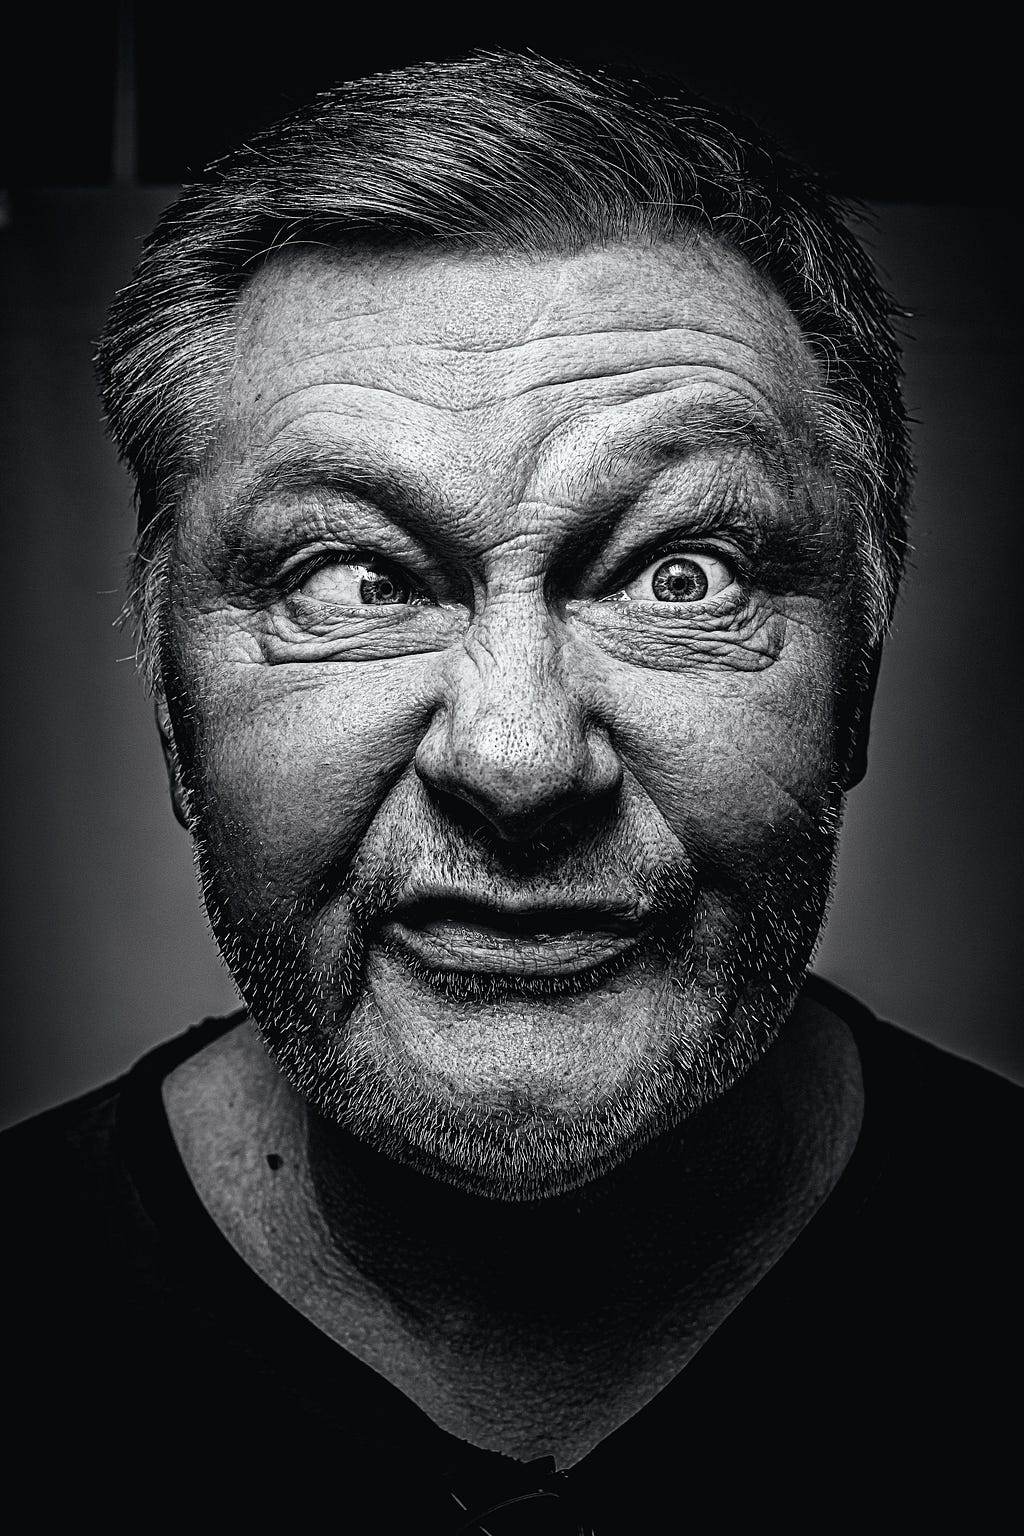 A Black & White Portriate of an older man making a funny face